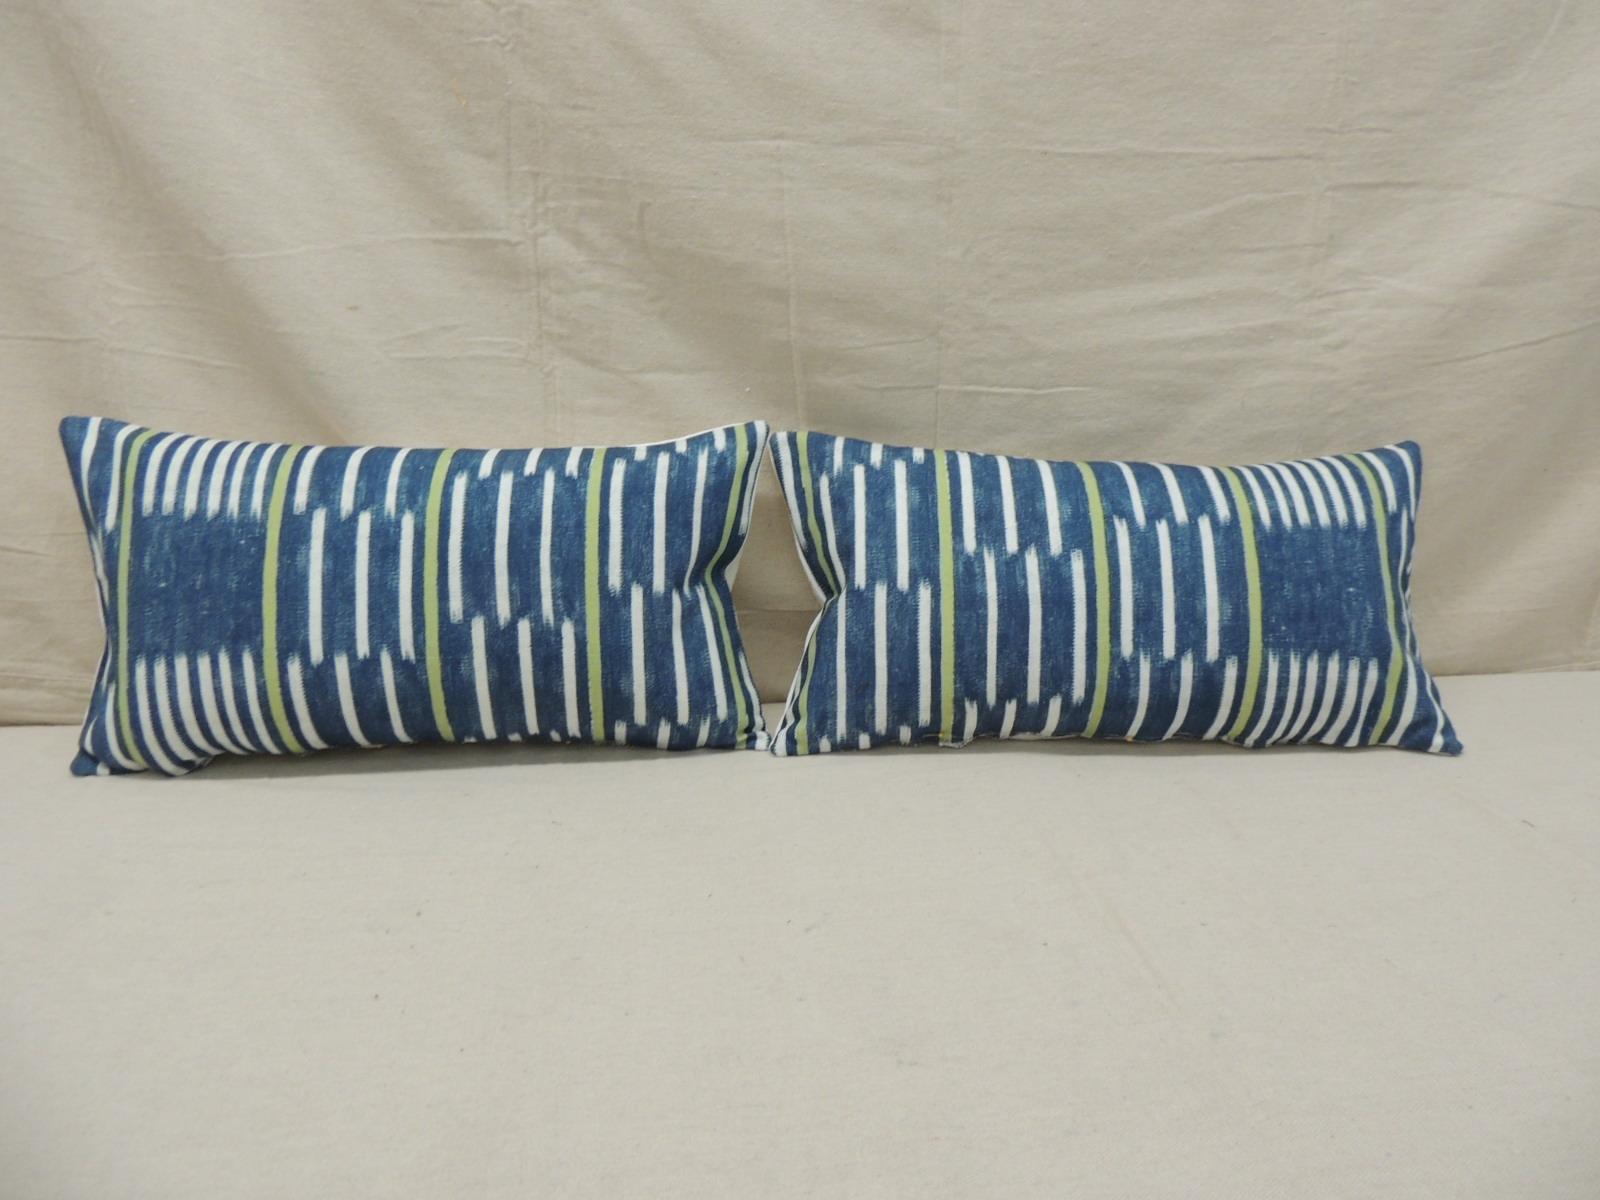 Pair of blue and white Ikat style modern lumbar decorative pillows.
White cotton backings.
Decorative pillows handcrafted in Portugal.
Closure by stitch (no zipper closure) with custom-made feather/Down pillow insert.
Size: 12